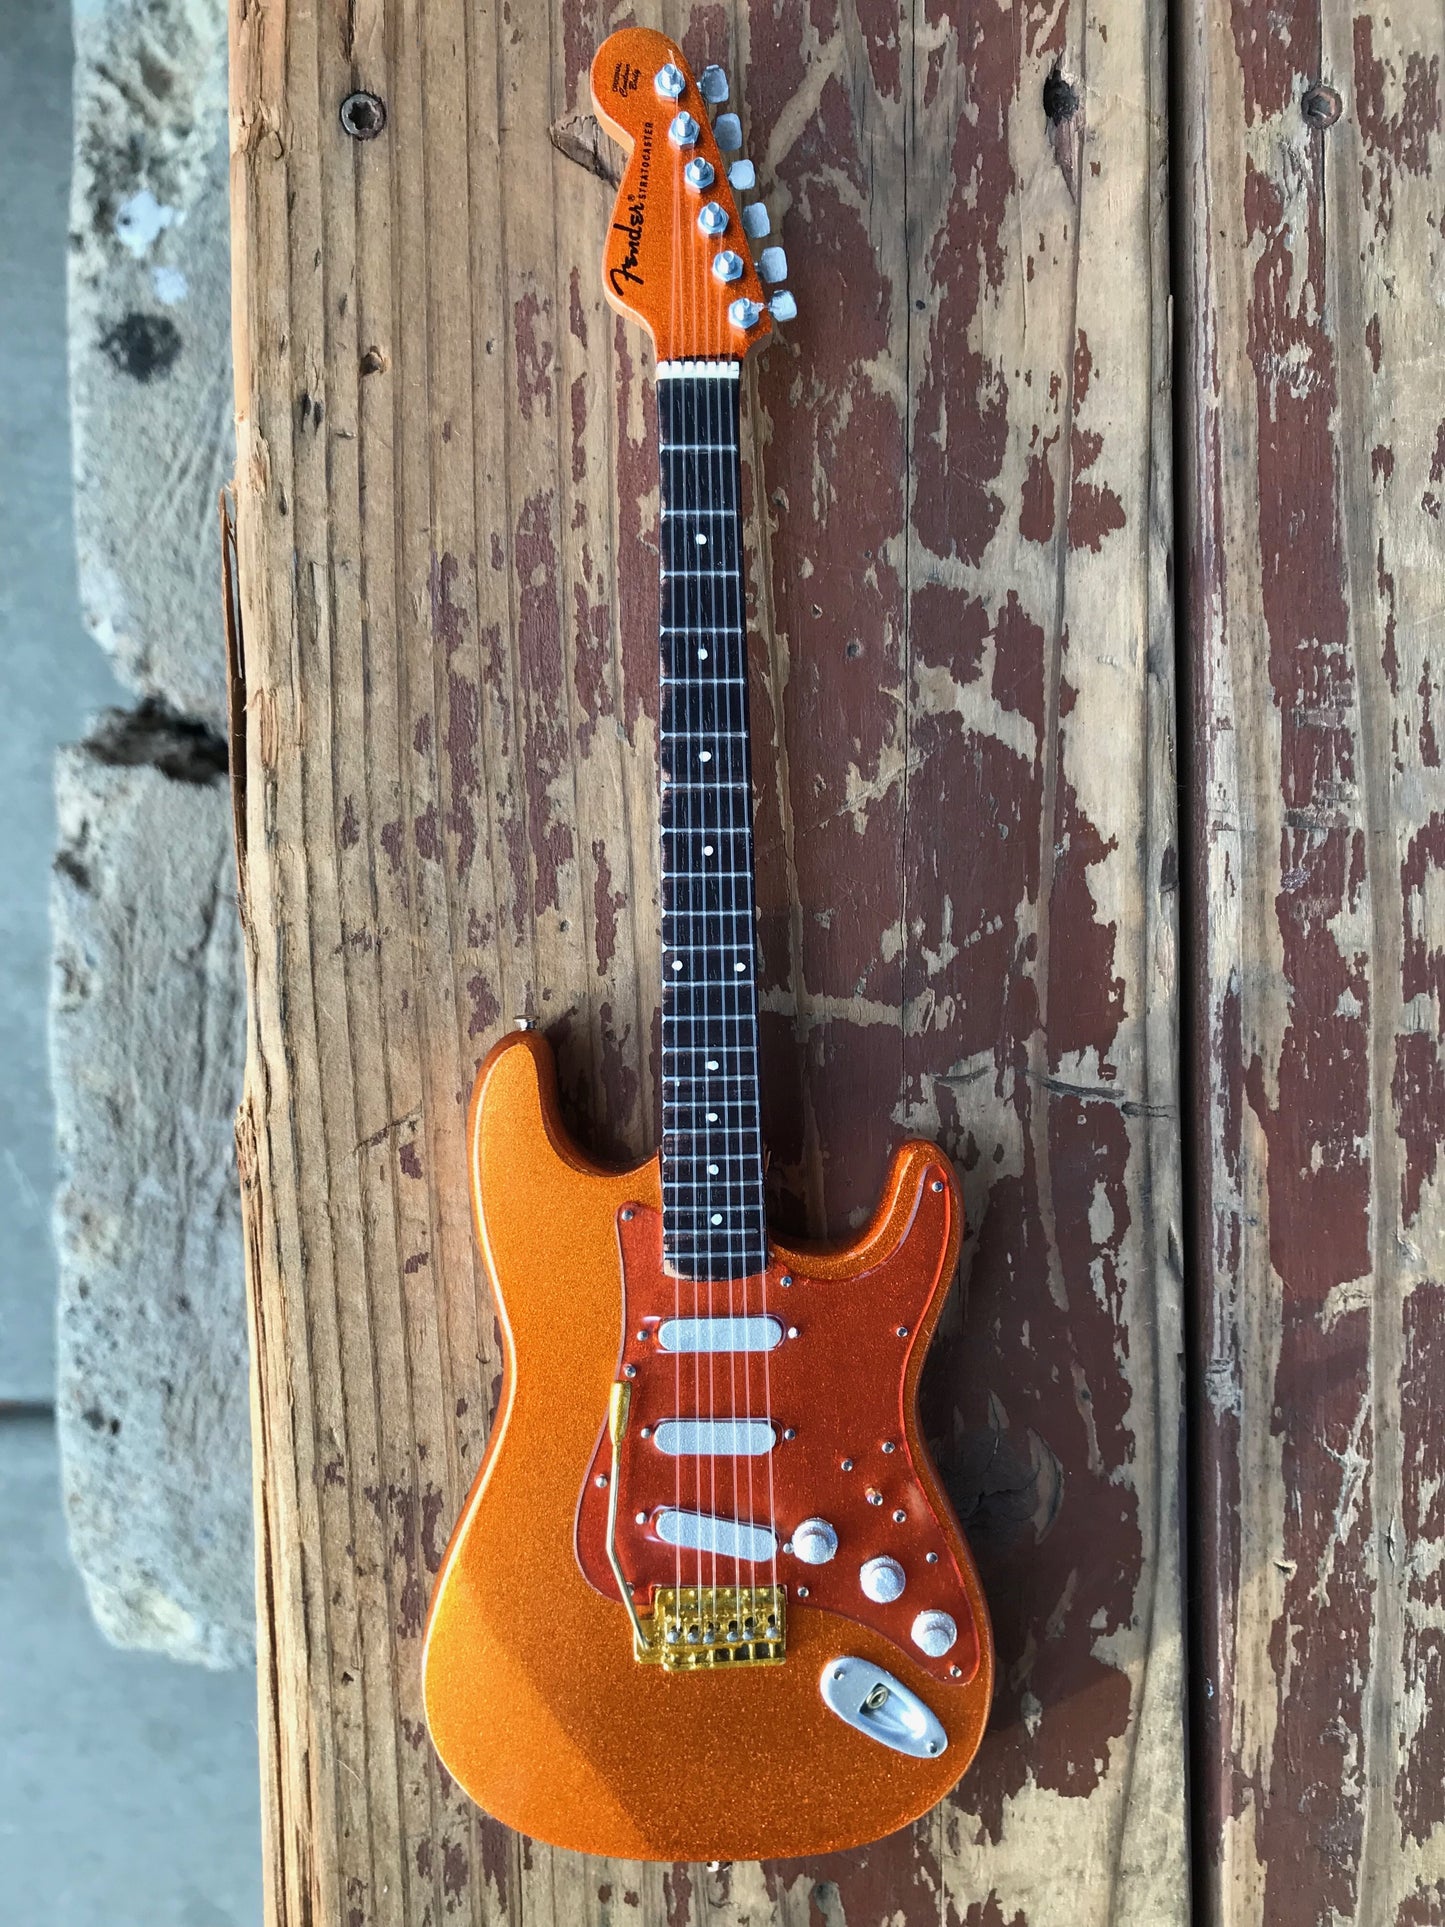 Autographed Miniature Replica of Kenny's Copperboy Strat